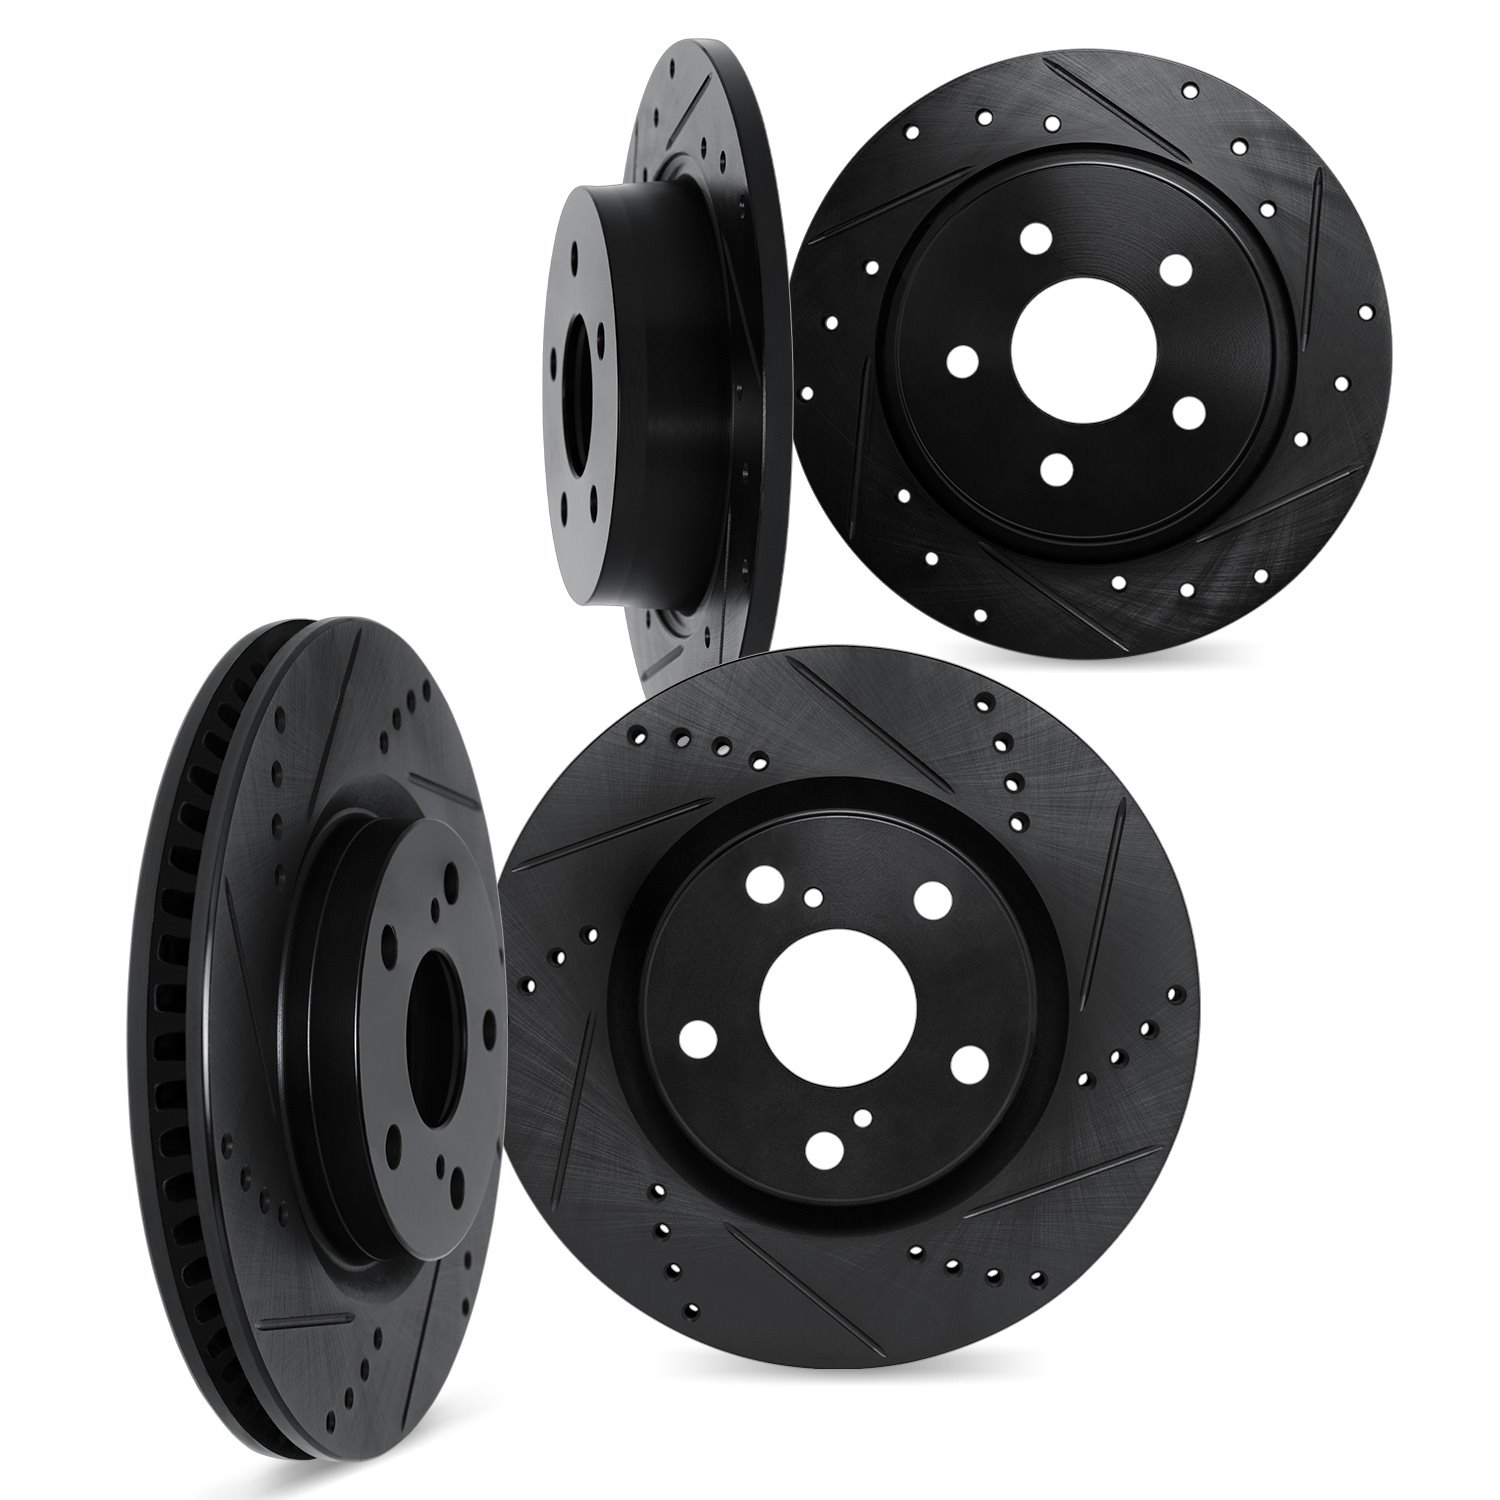 8004-76101 Drilled/Slotted Brake Rotors [Black], 2004-2007 Lexus/Toyota/Scion, Position: Front and Rear